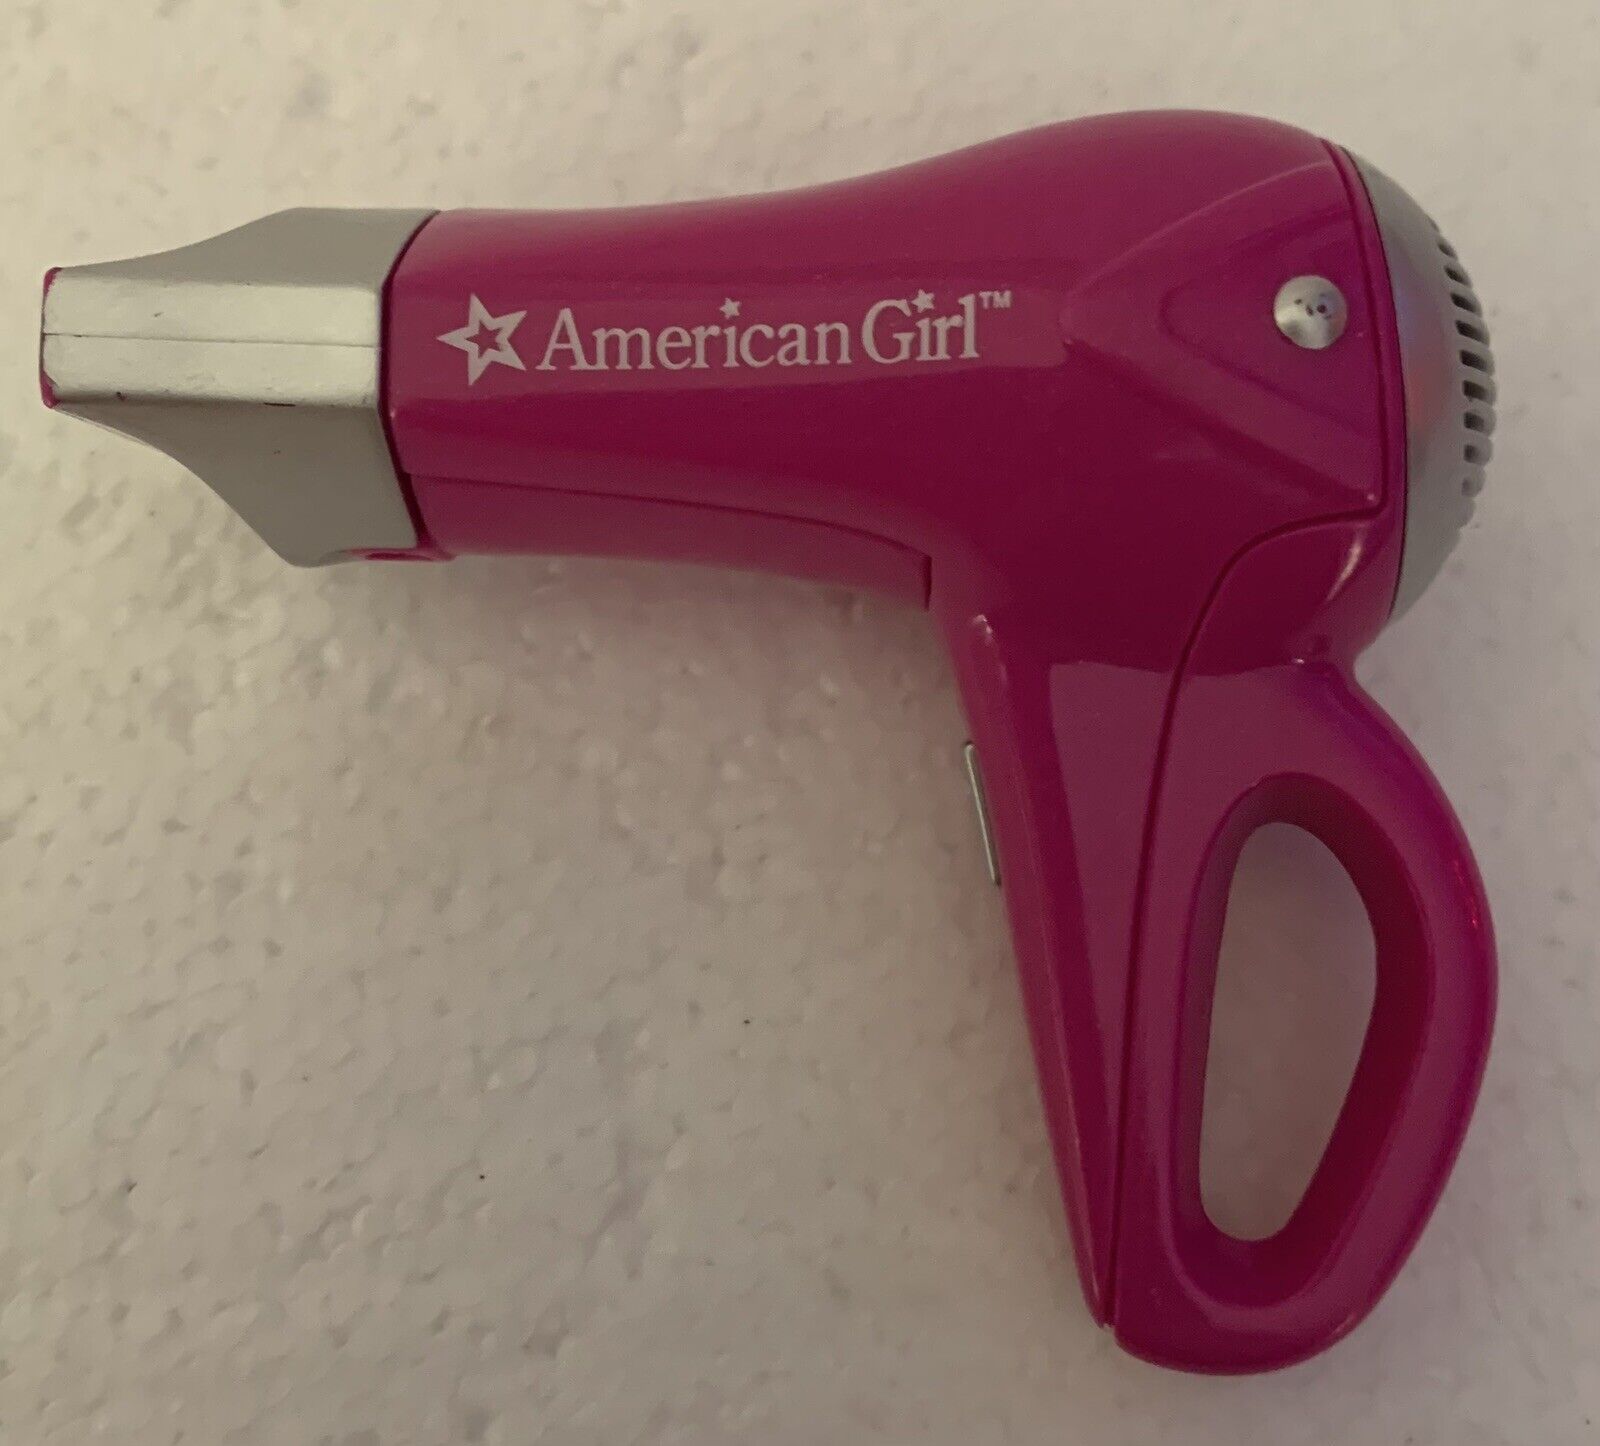 American Girl Doll Truly Me Hair Salon Hair Dryer Blow Dryer with Sound  Works | eBay